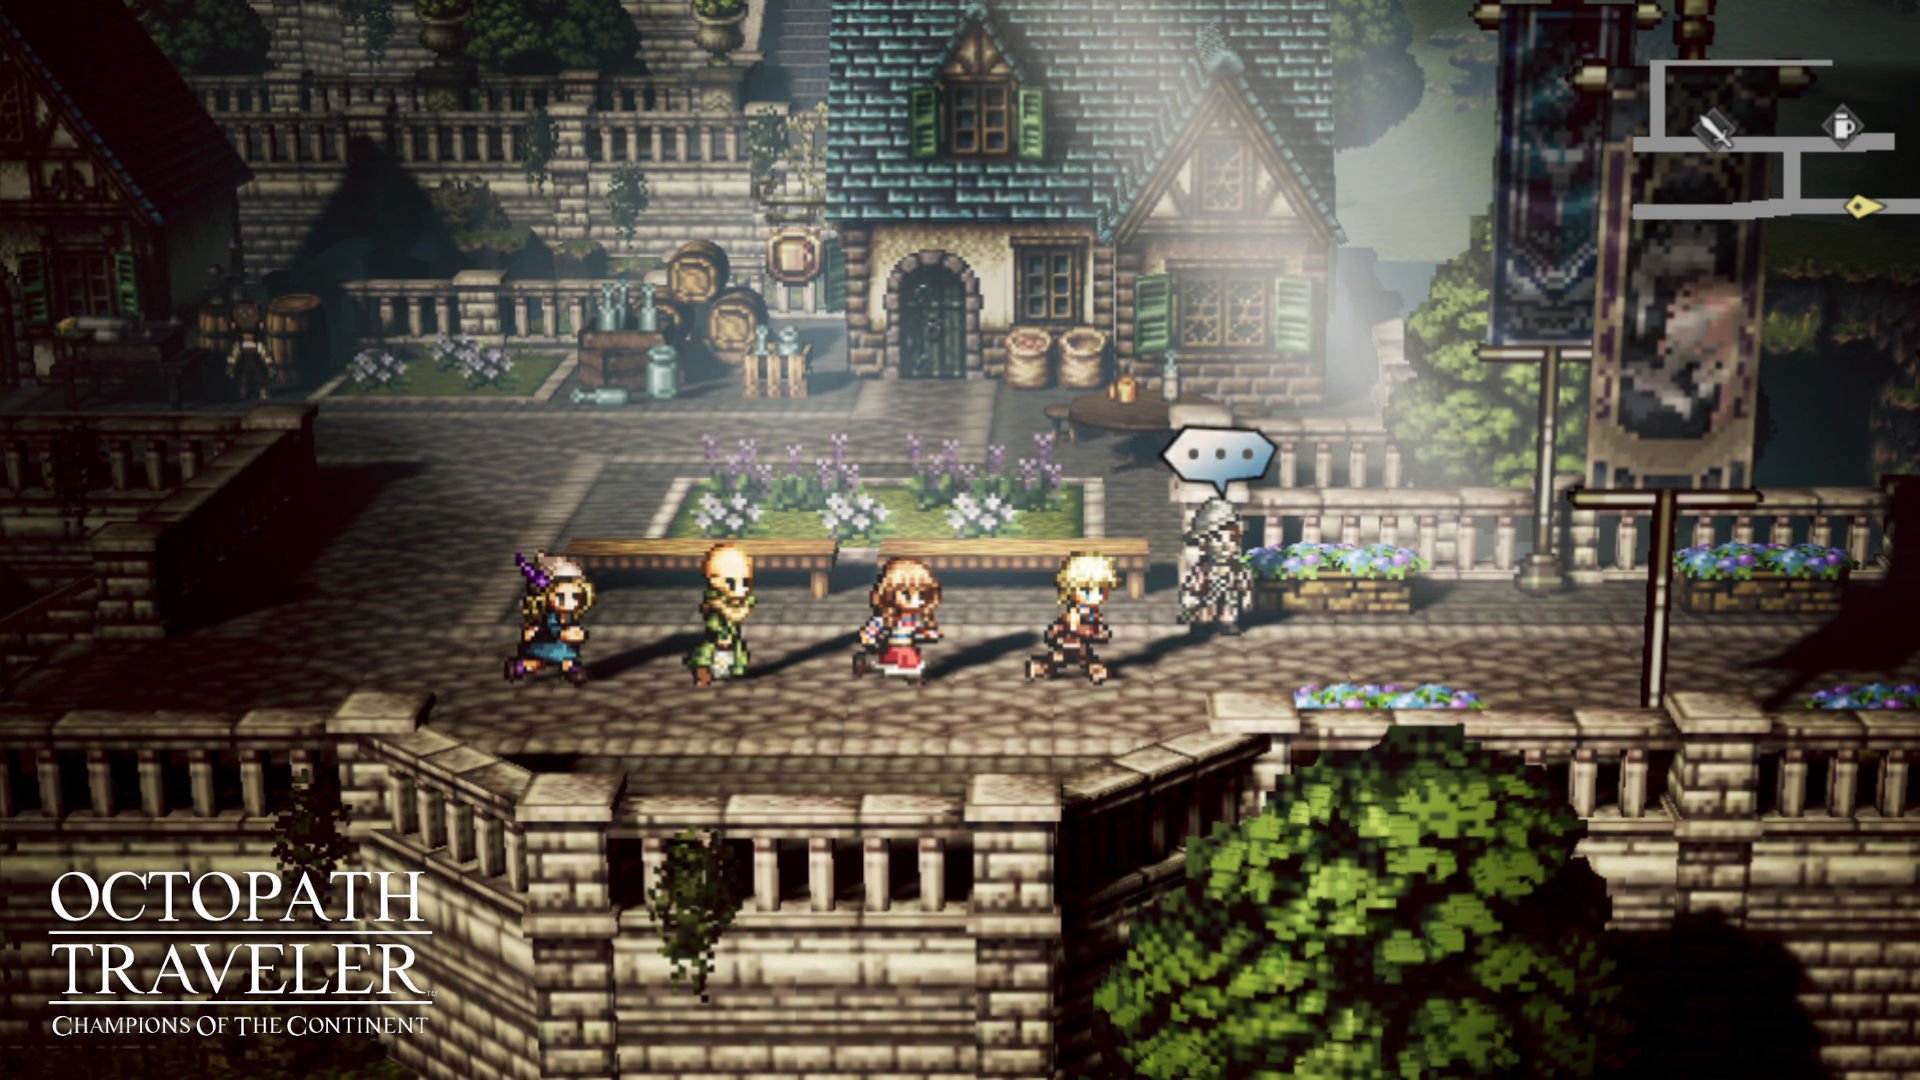 Octopath Traveler: Champions of the Continent Release Date